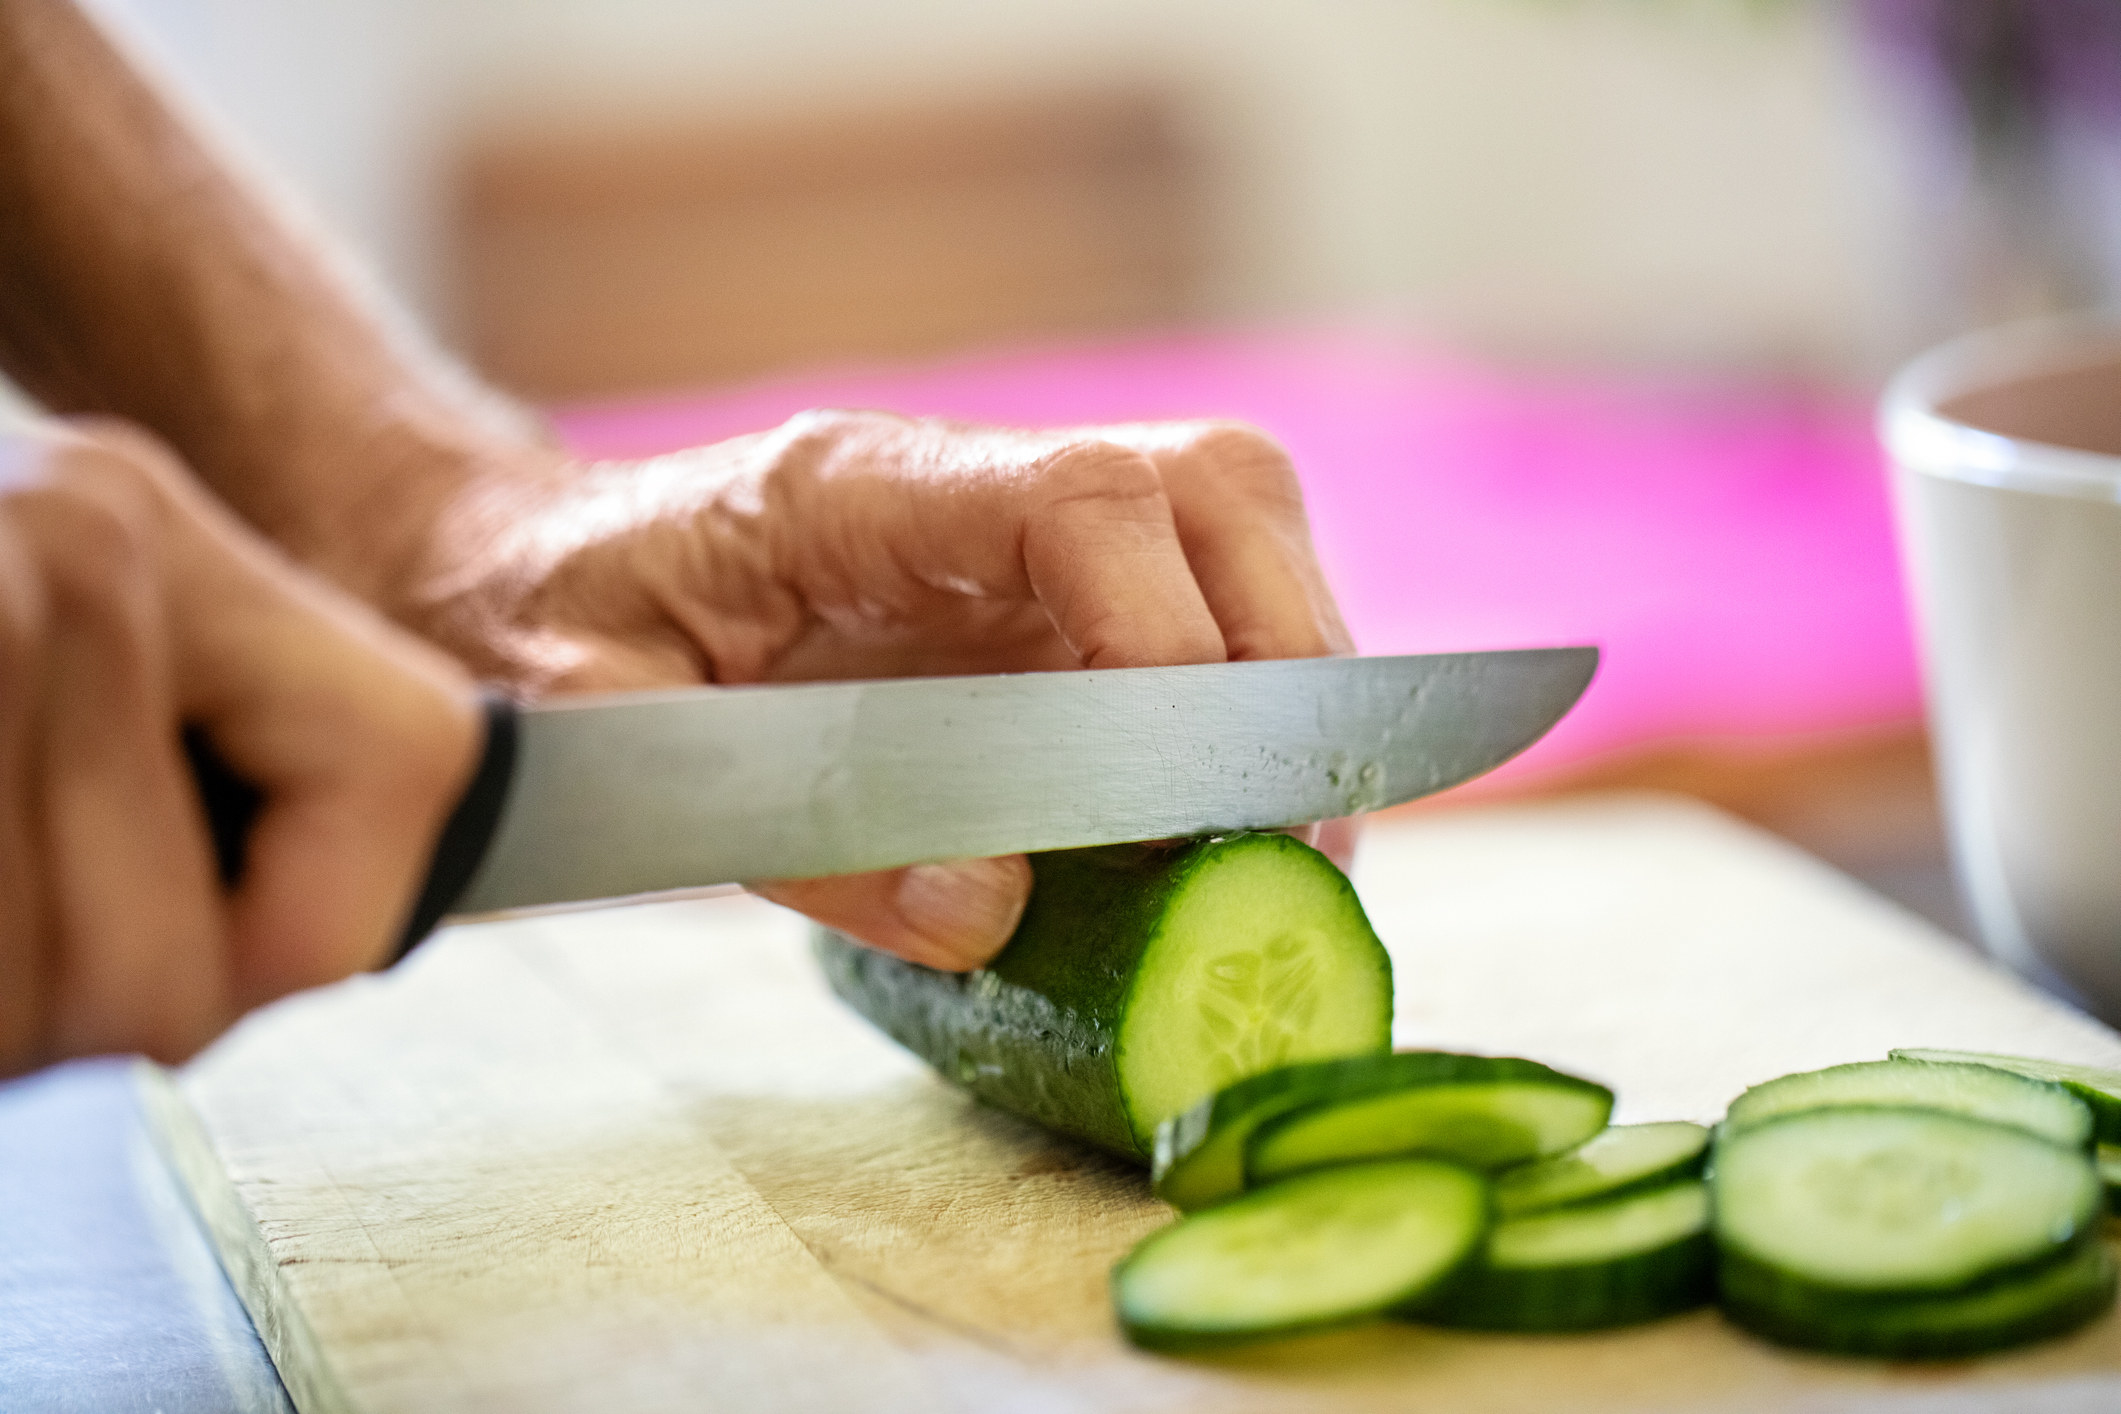 A person slicing a cucumber with a knife.